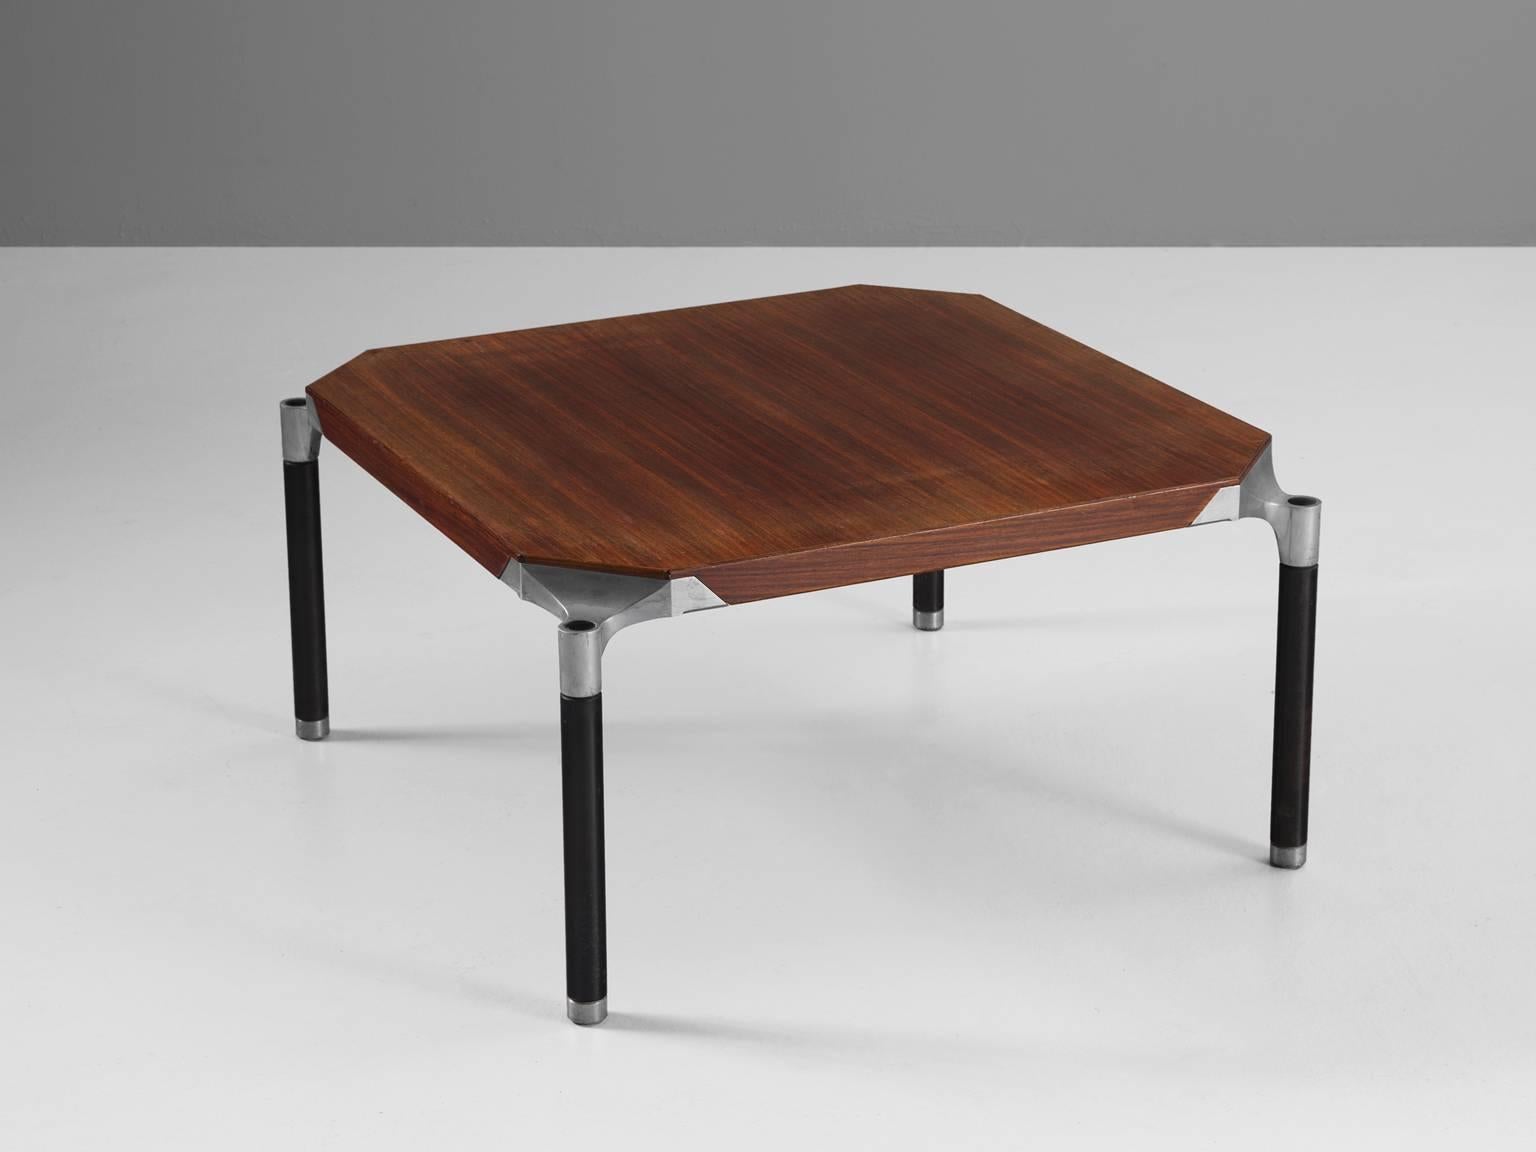 MIM Roma, coffee table, mahogany, Italy, 1960s.

This coffee table is an exquisite example of Ico Parisi's style on which the design of this table is inspired. This piece is solid and elegant at the same time and could fit in various types of